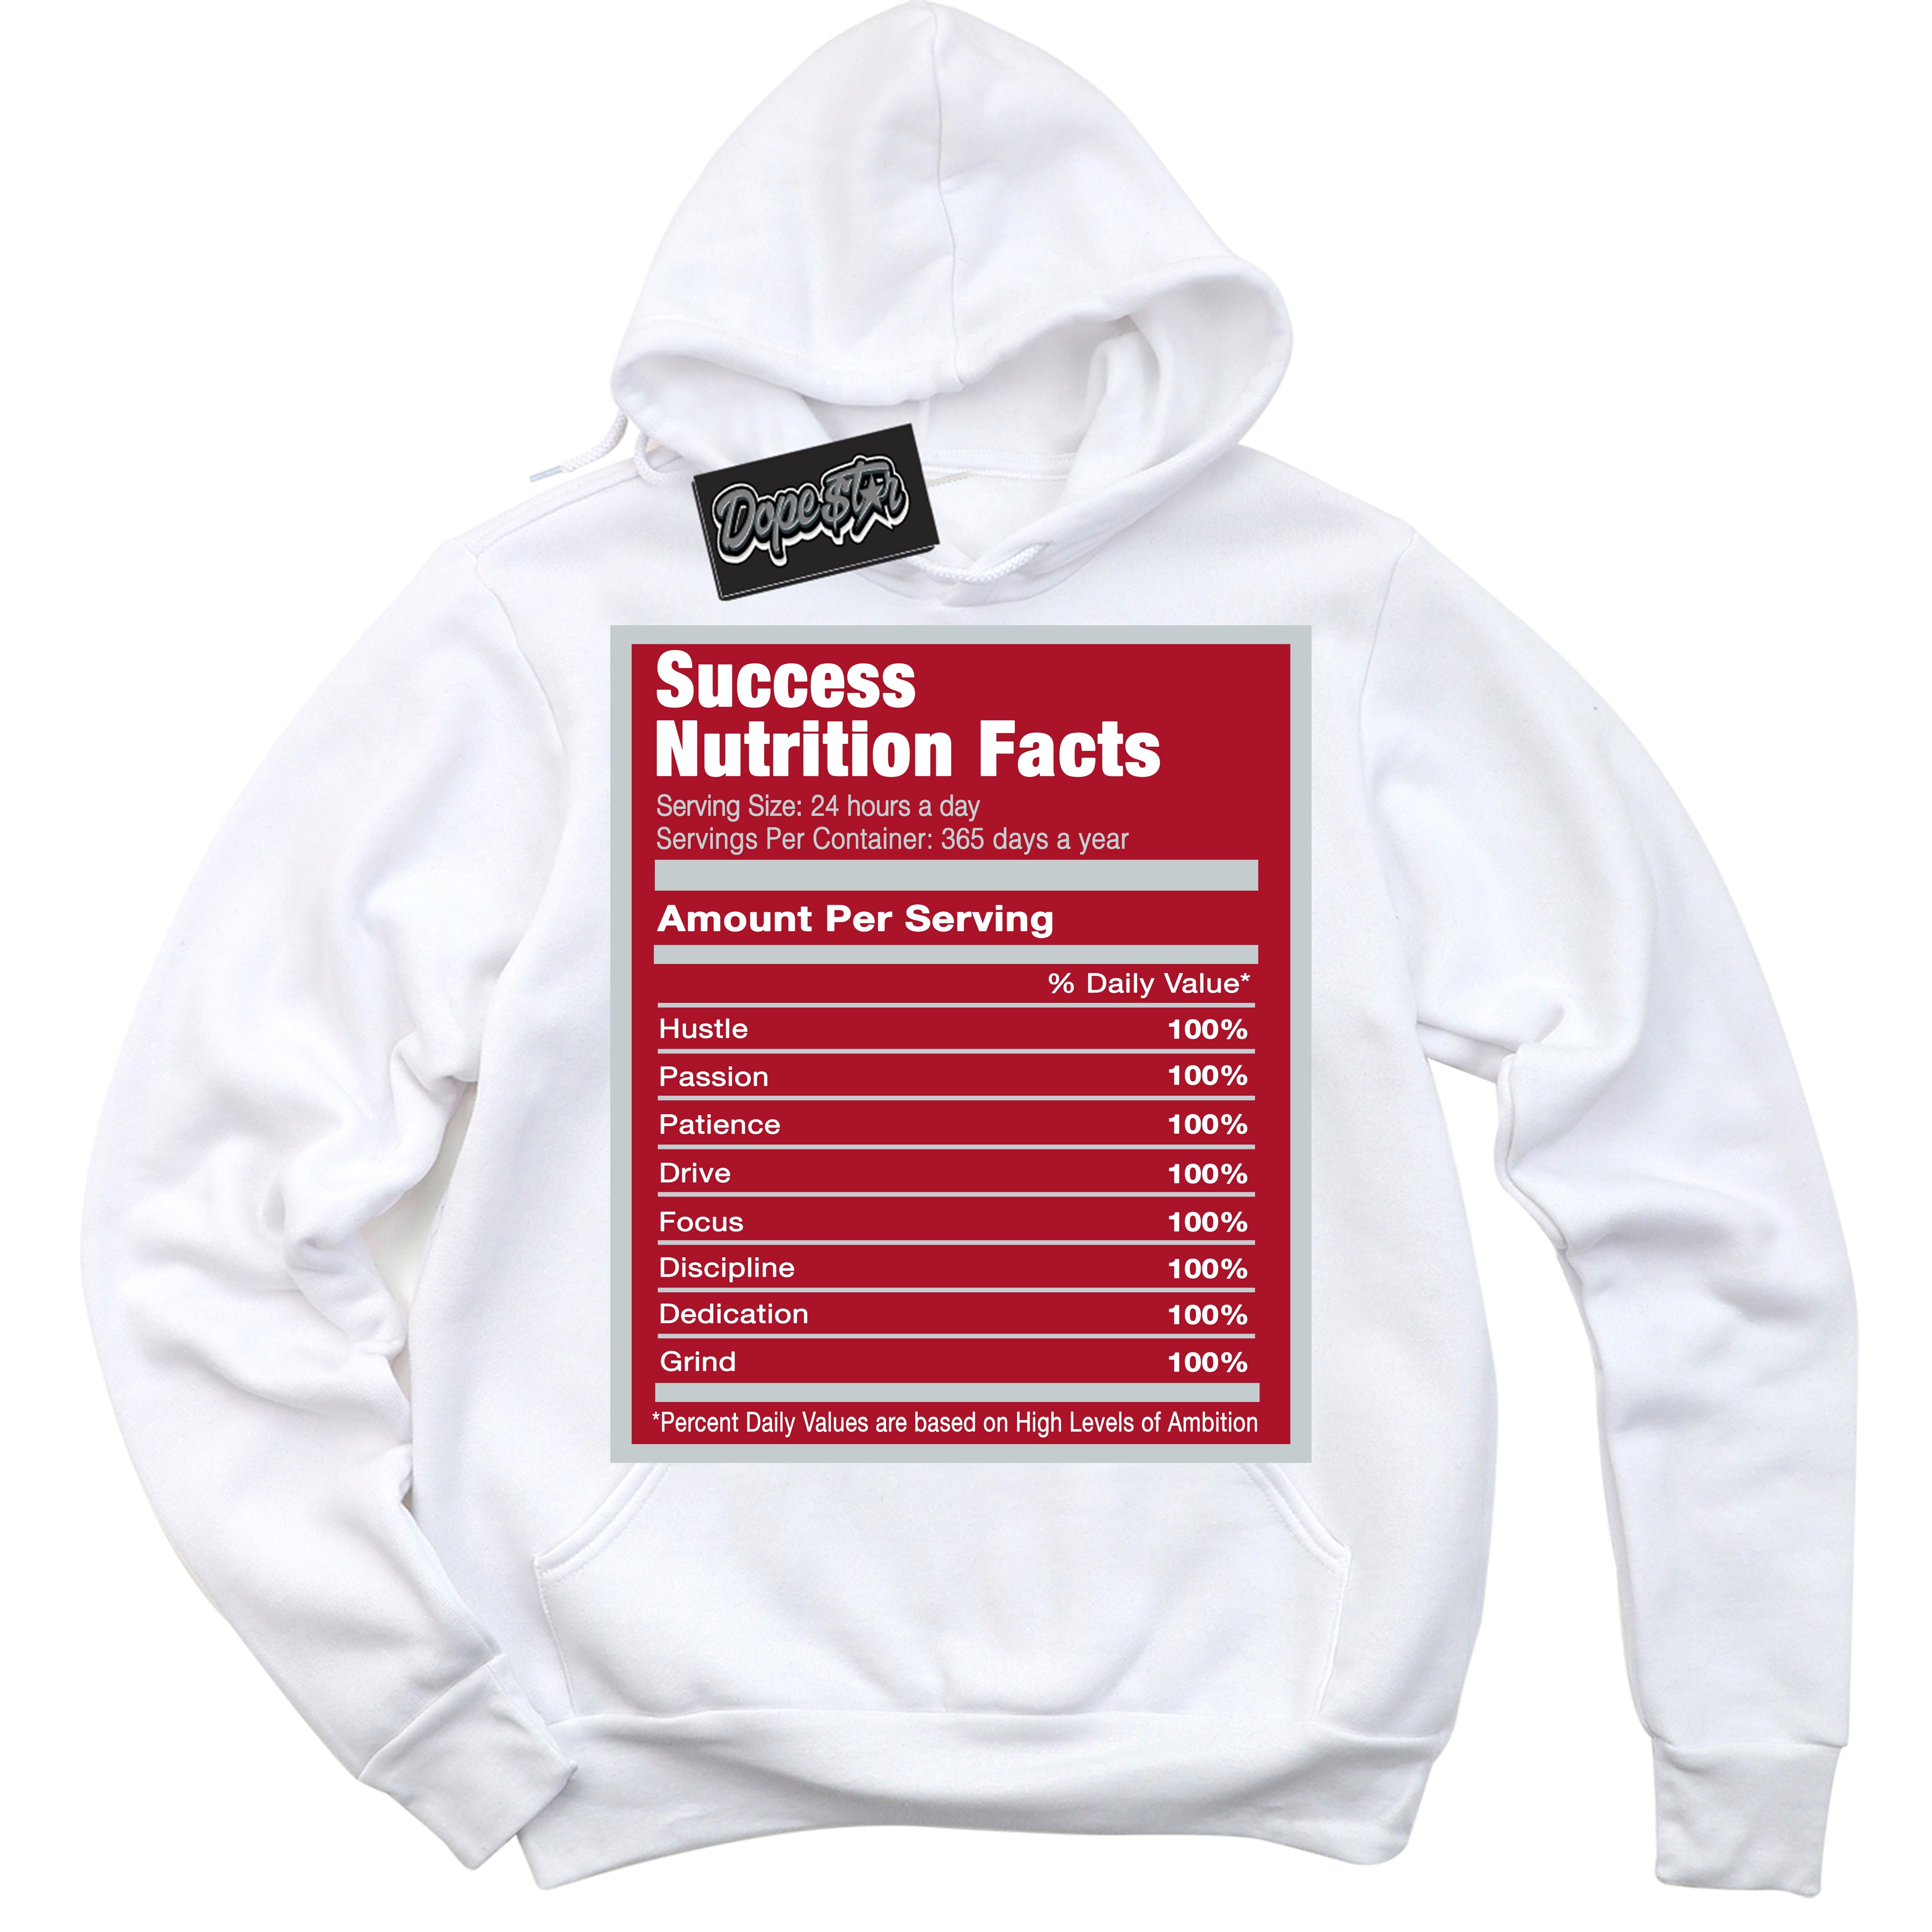 Cool White Hoodie with “ Success Nutrition ”  design that Perfectly Matches Reverse Ultraman Sneakers.